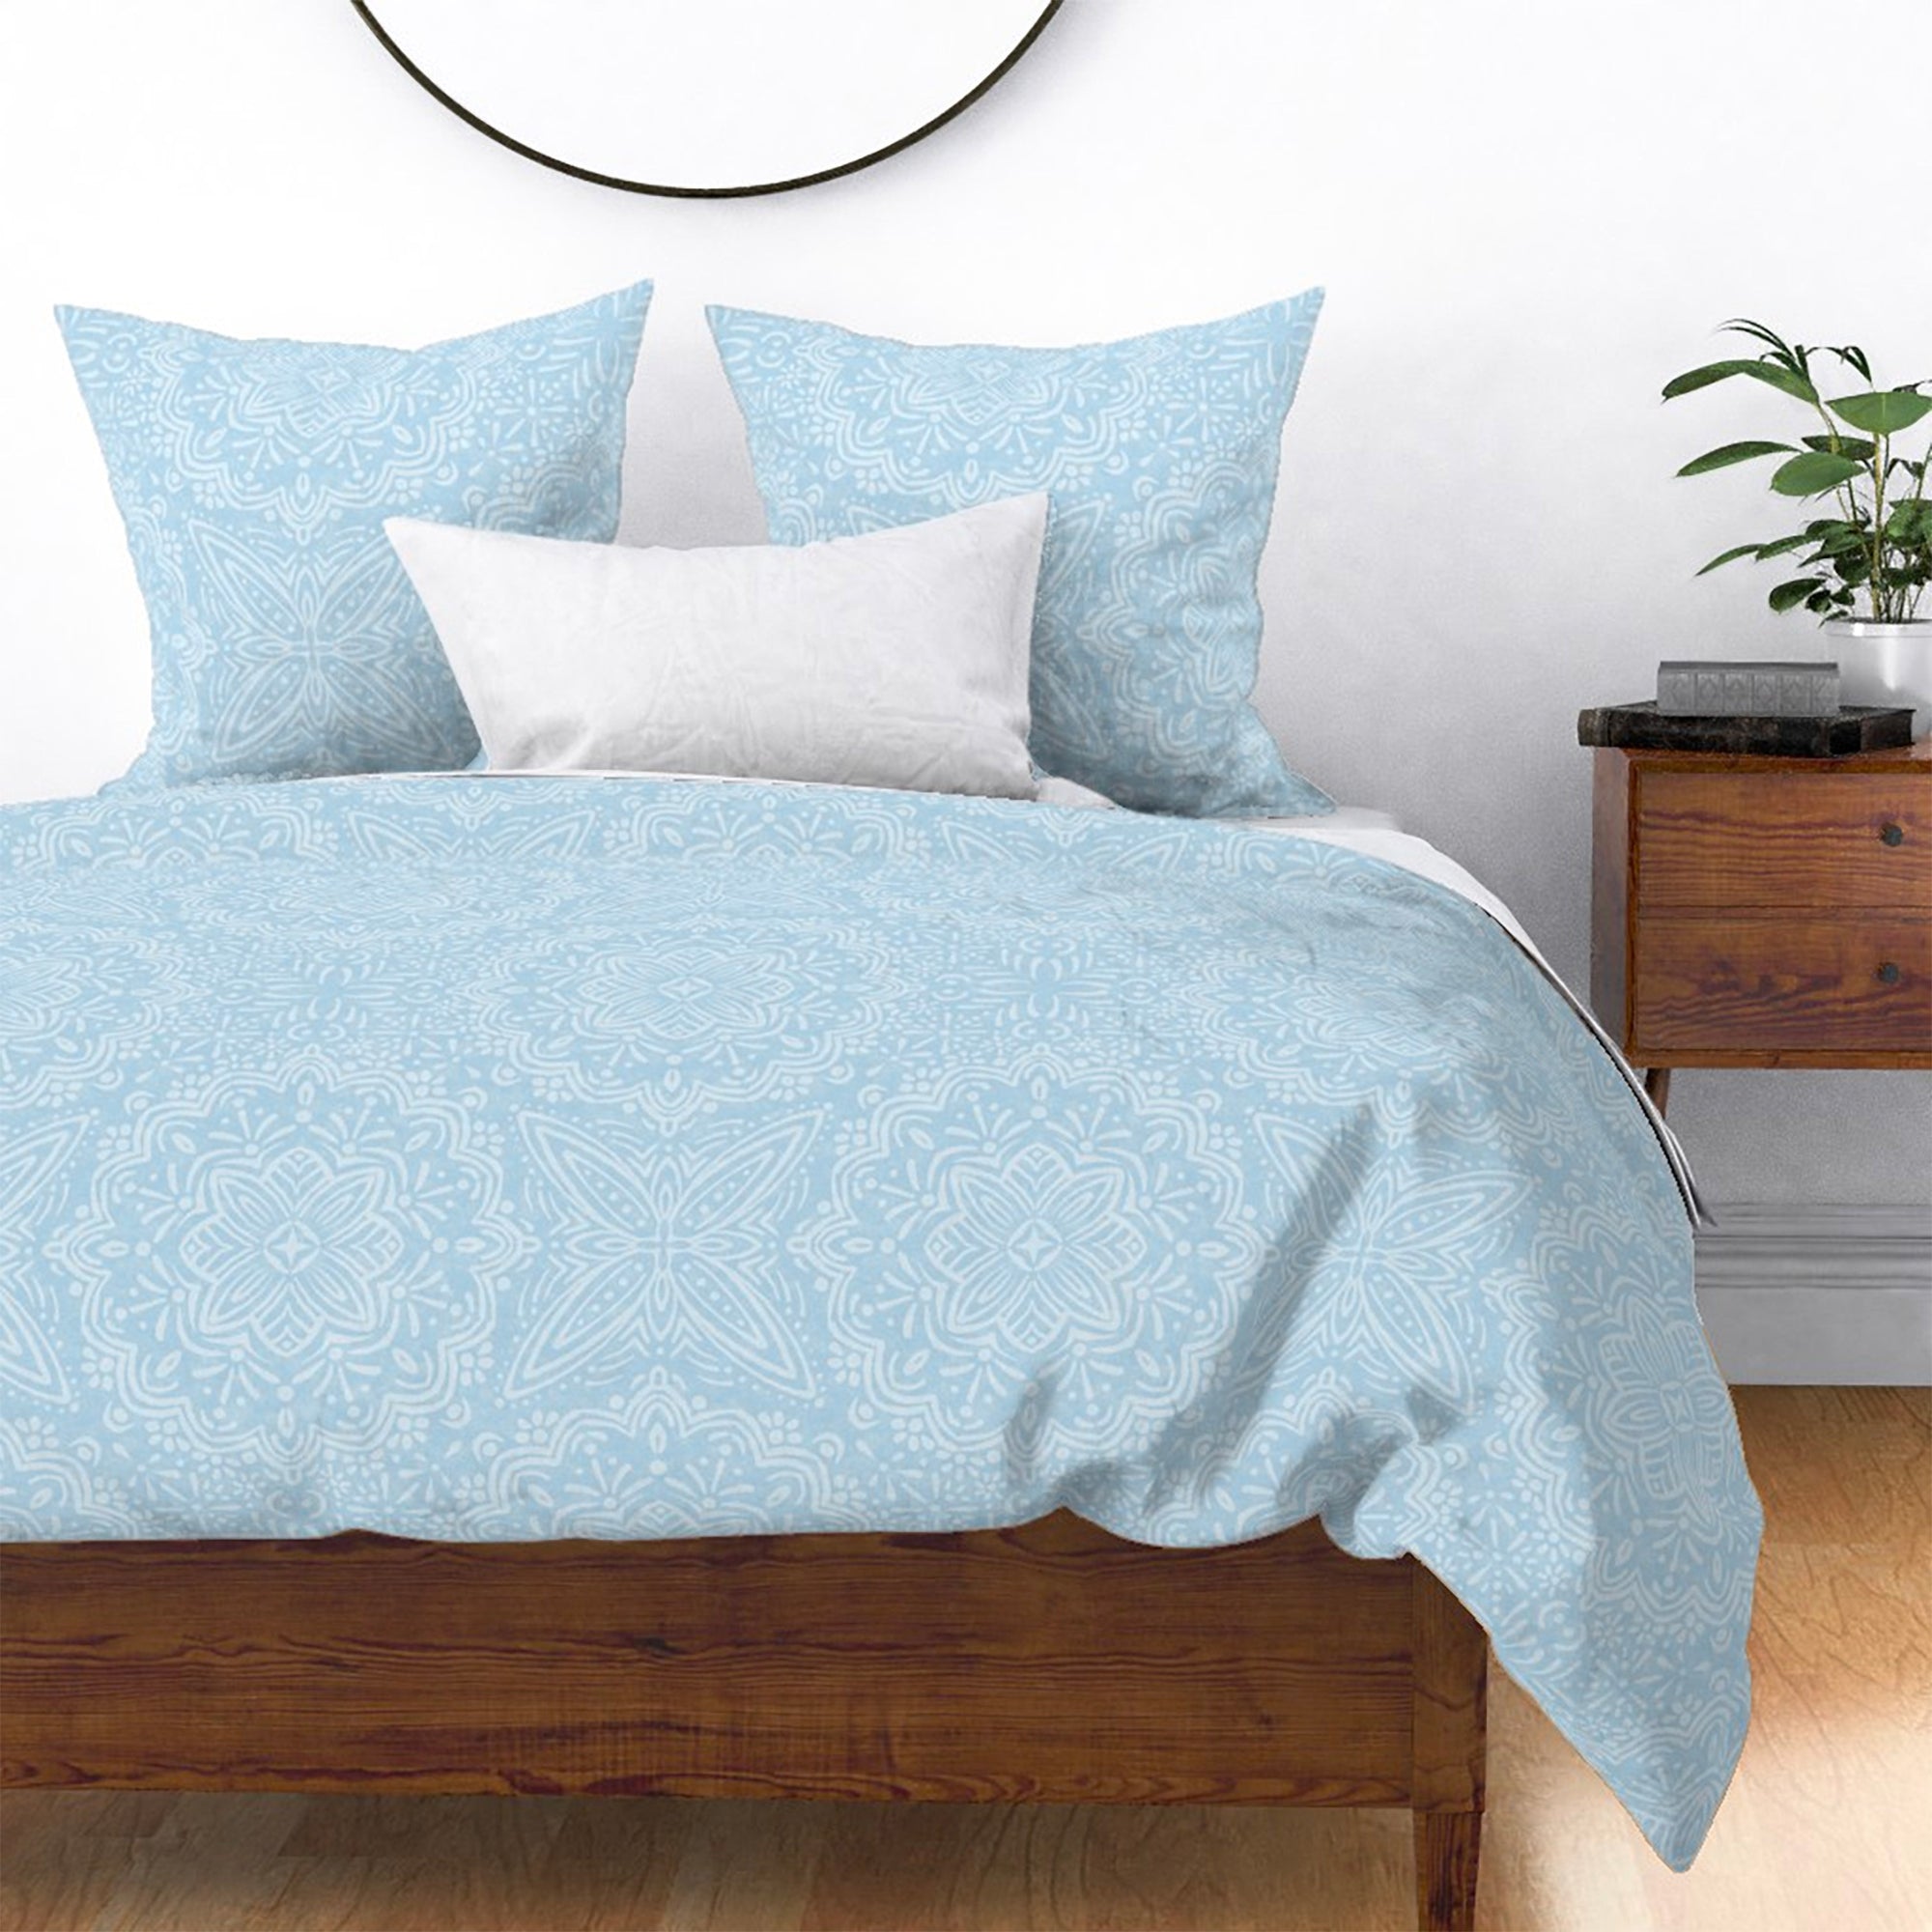 Example duvet cover and euro shams (not included in the set). 